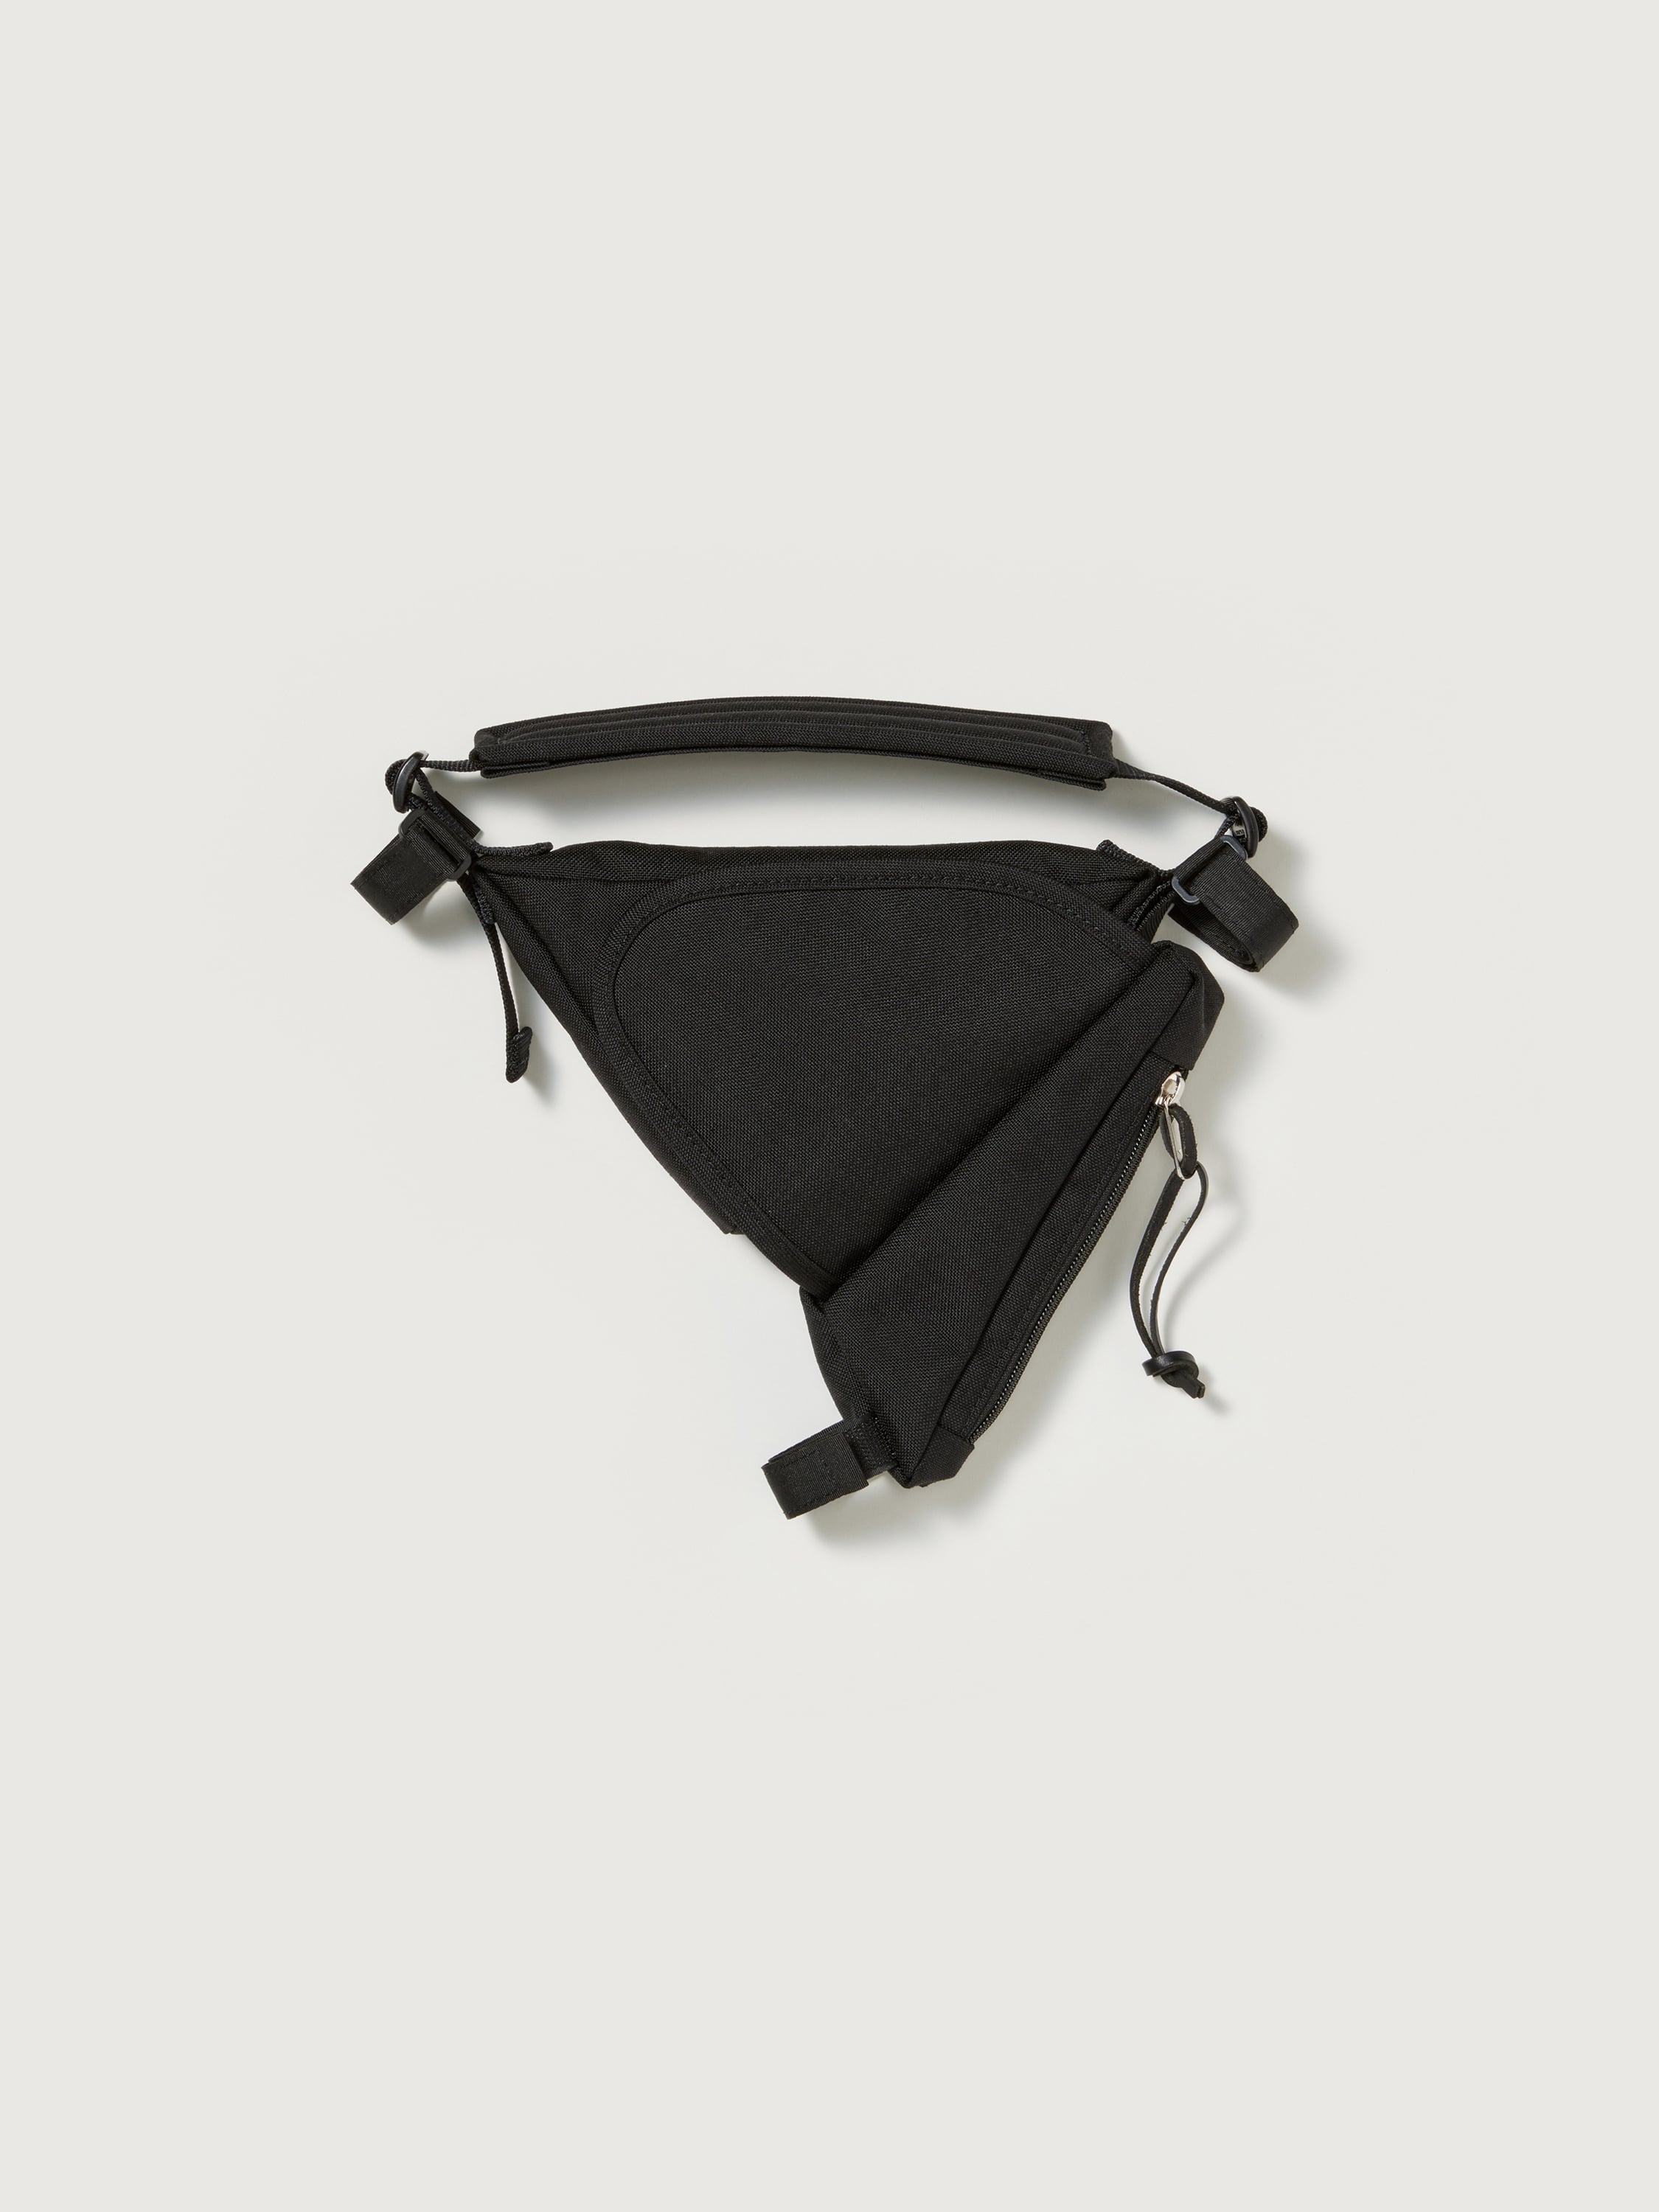 NYLON SADDLE BAG MADE BY AETA - AURALEE Official Website